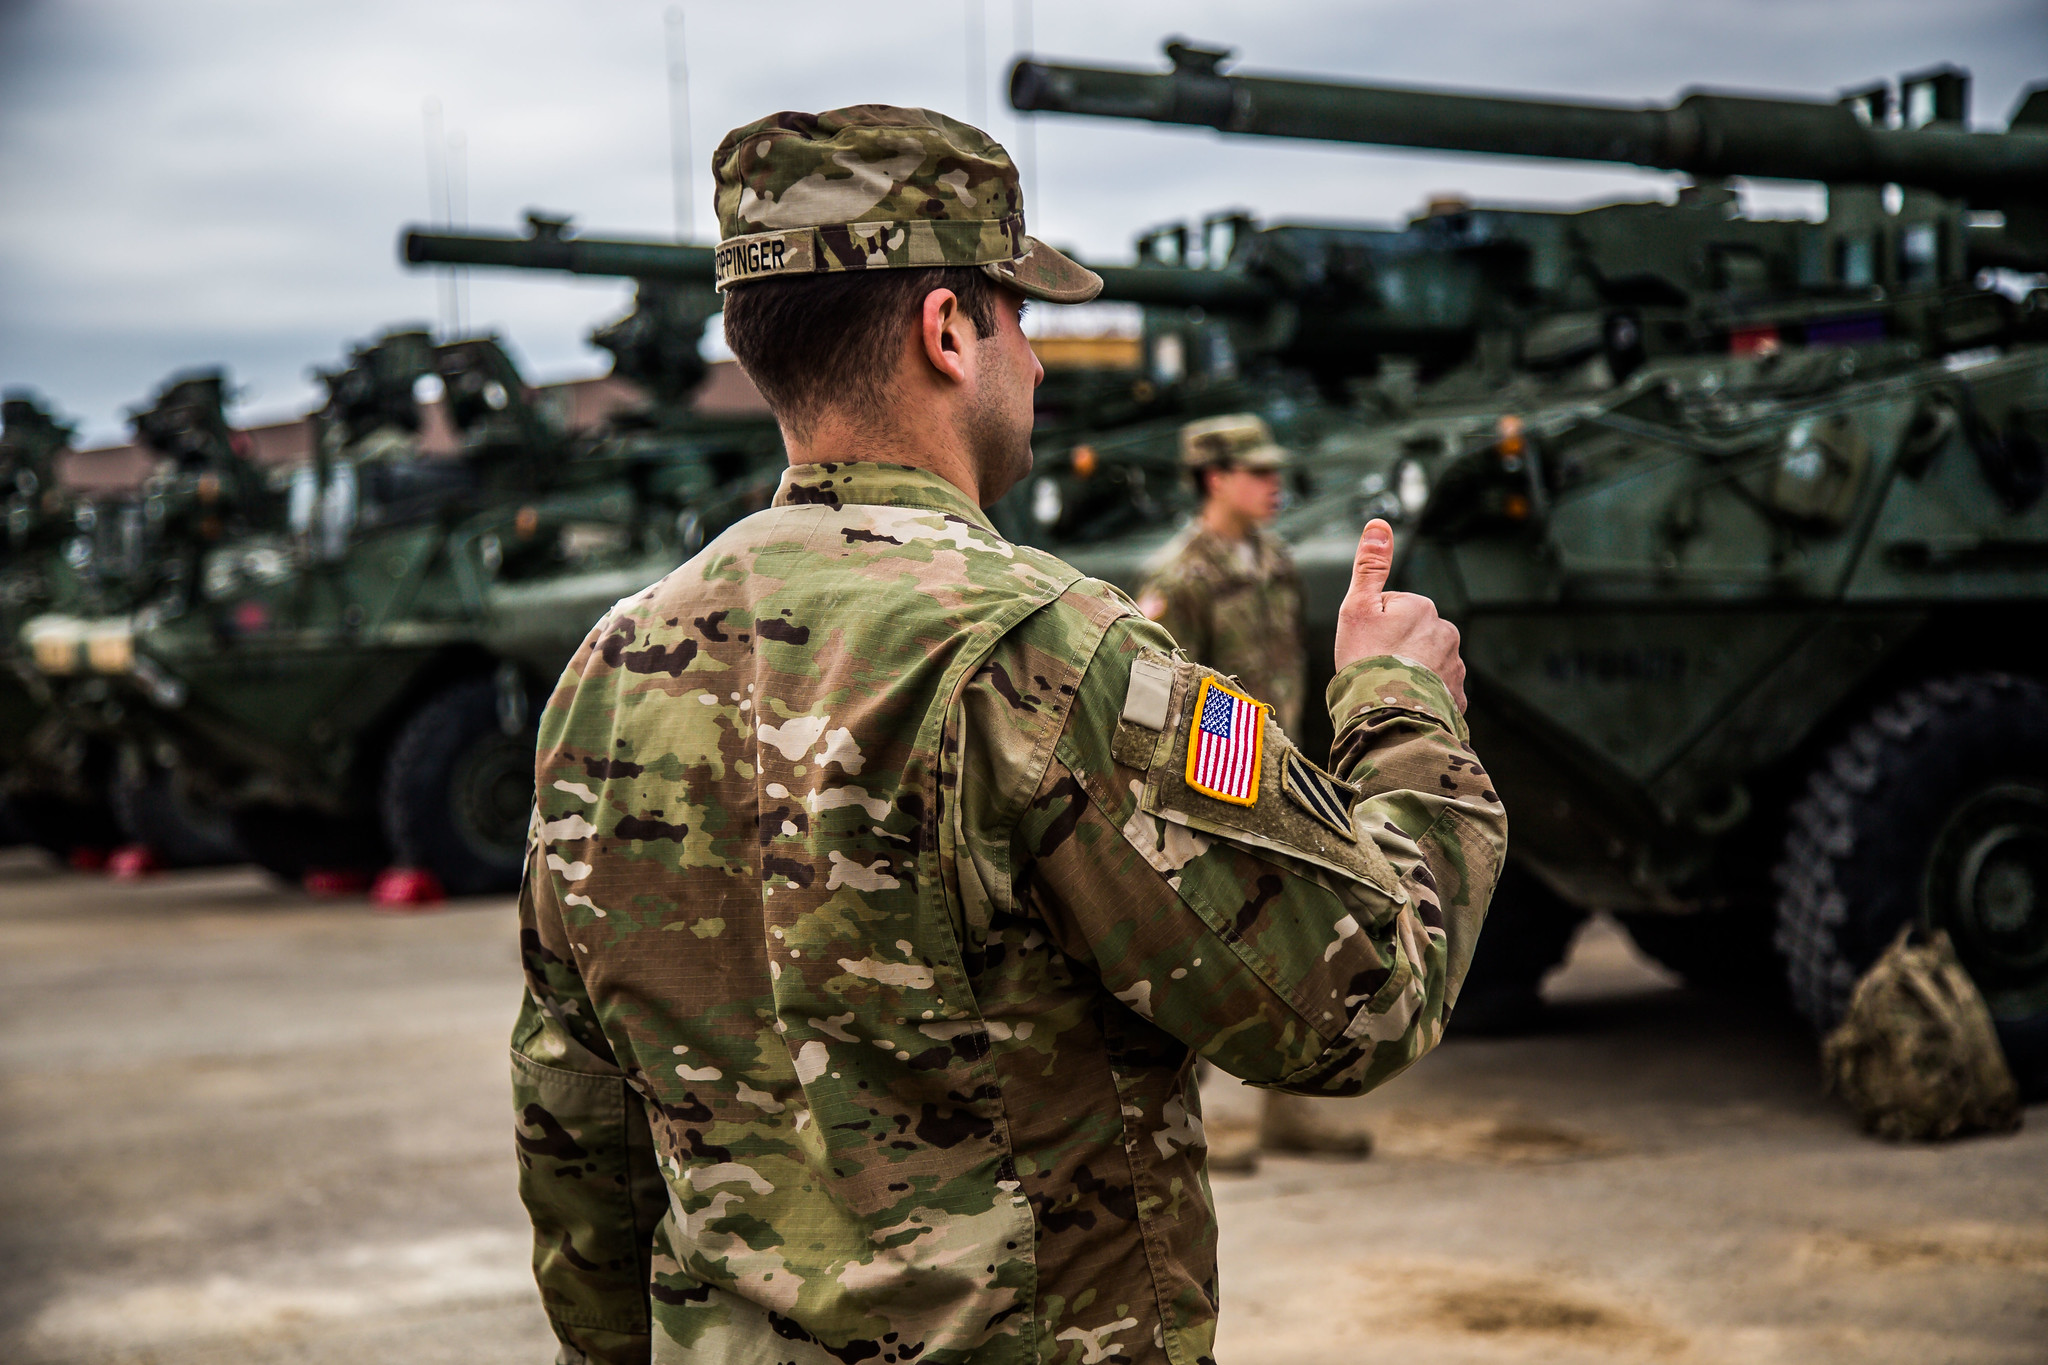 Enhanced Presence of the US Troops on NATO’s Eastern Flank